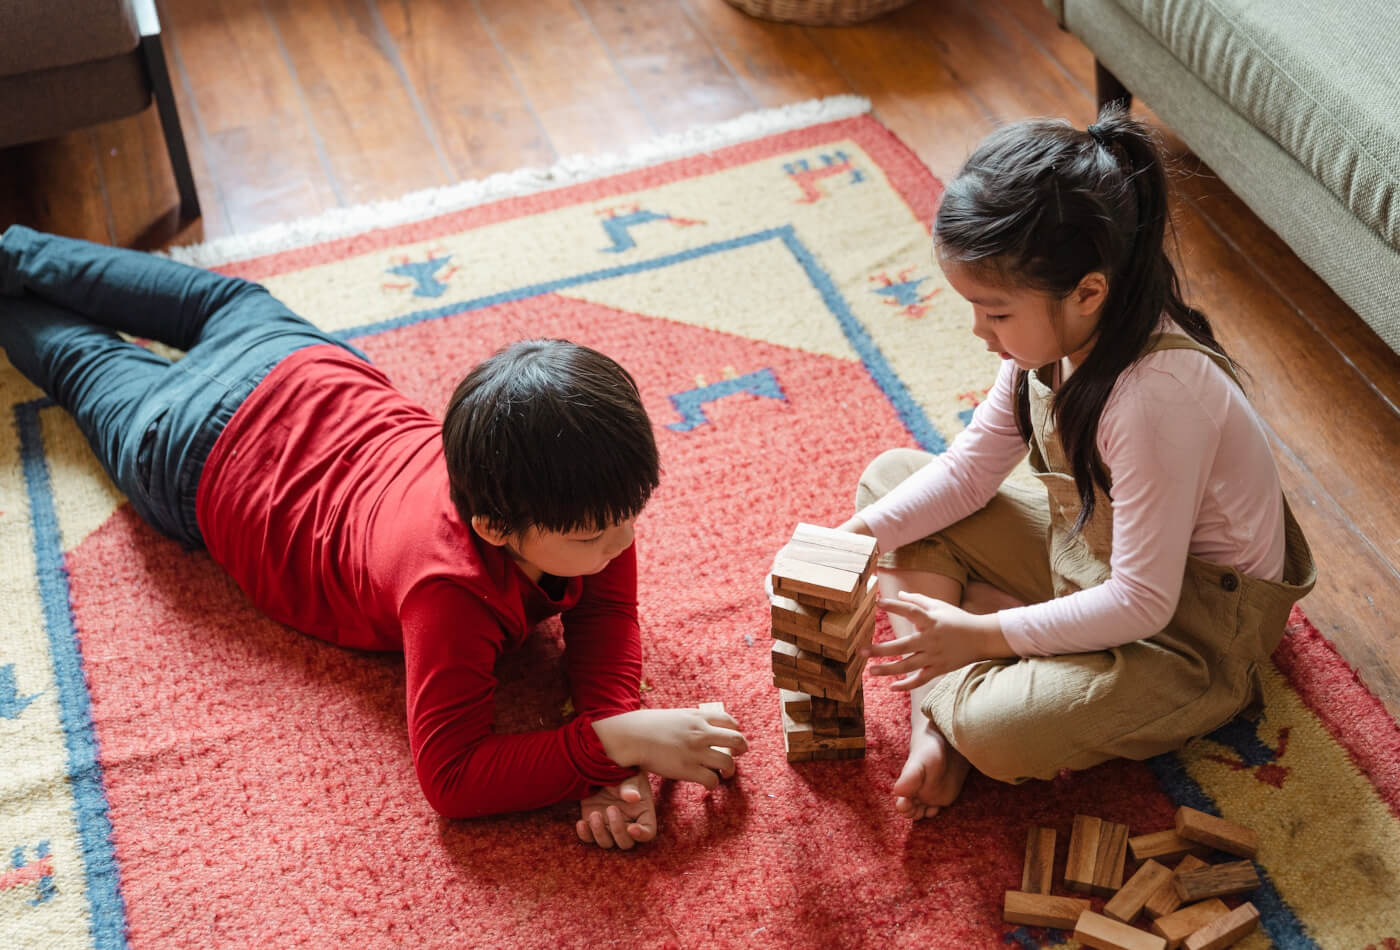 Two young children sat on a rug on the floor playing a game of jenga